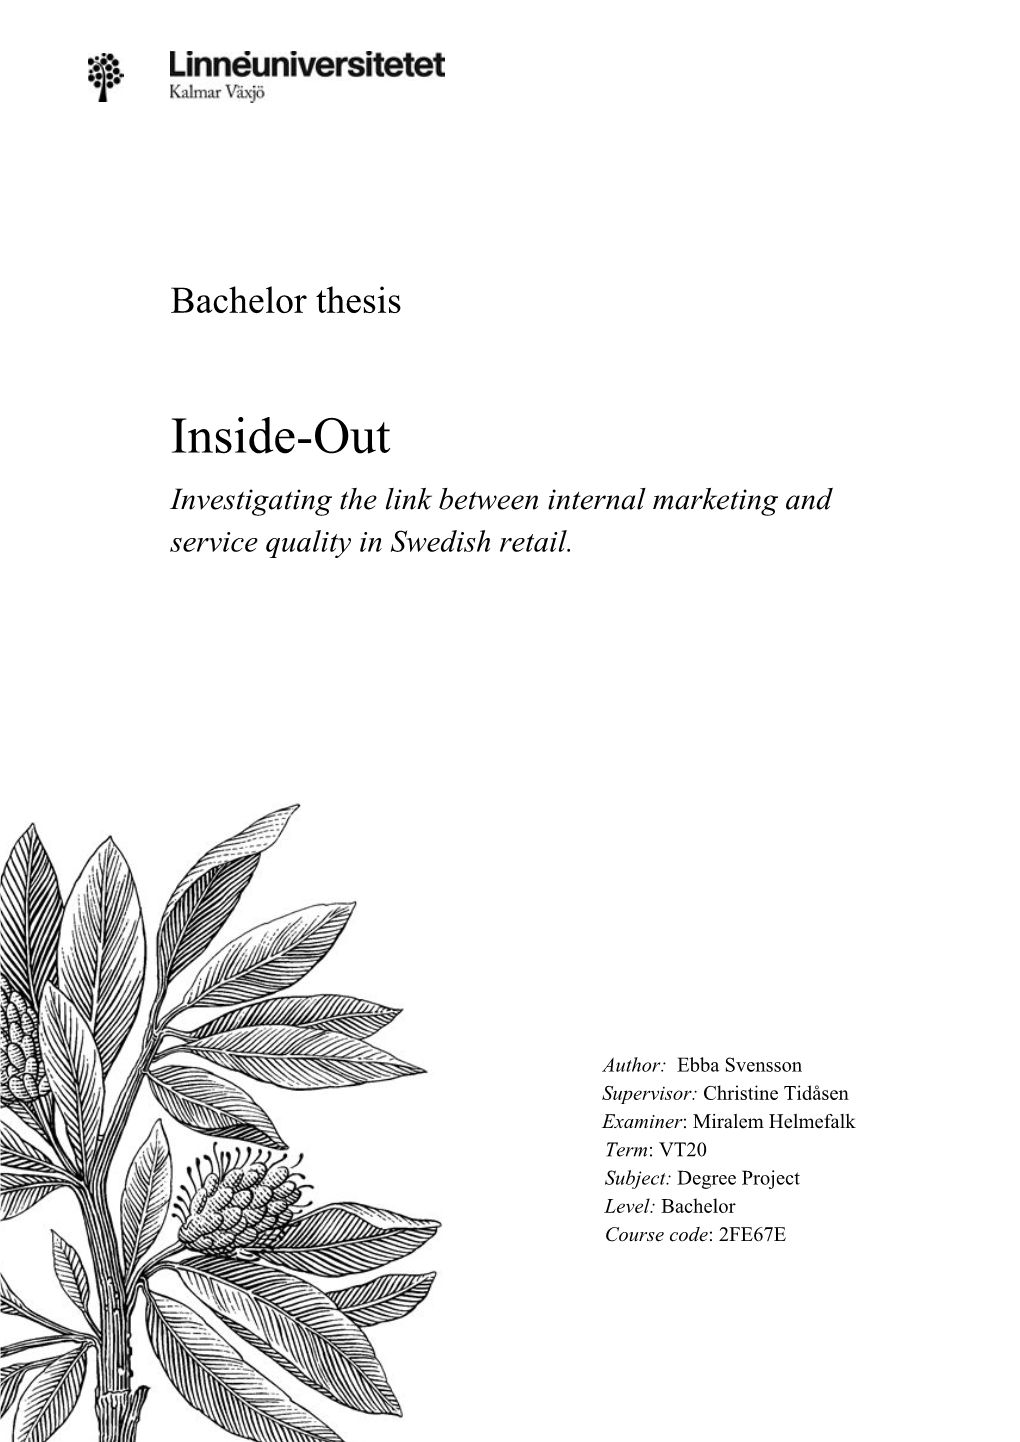 Inside-Out Investigating the Link Between Internal Marketing and Service Quality in Swedish Retail